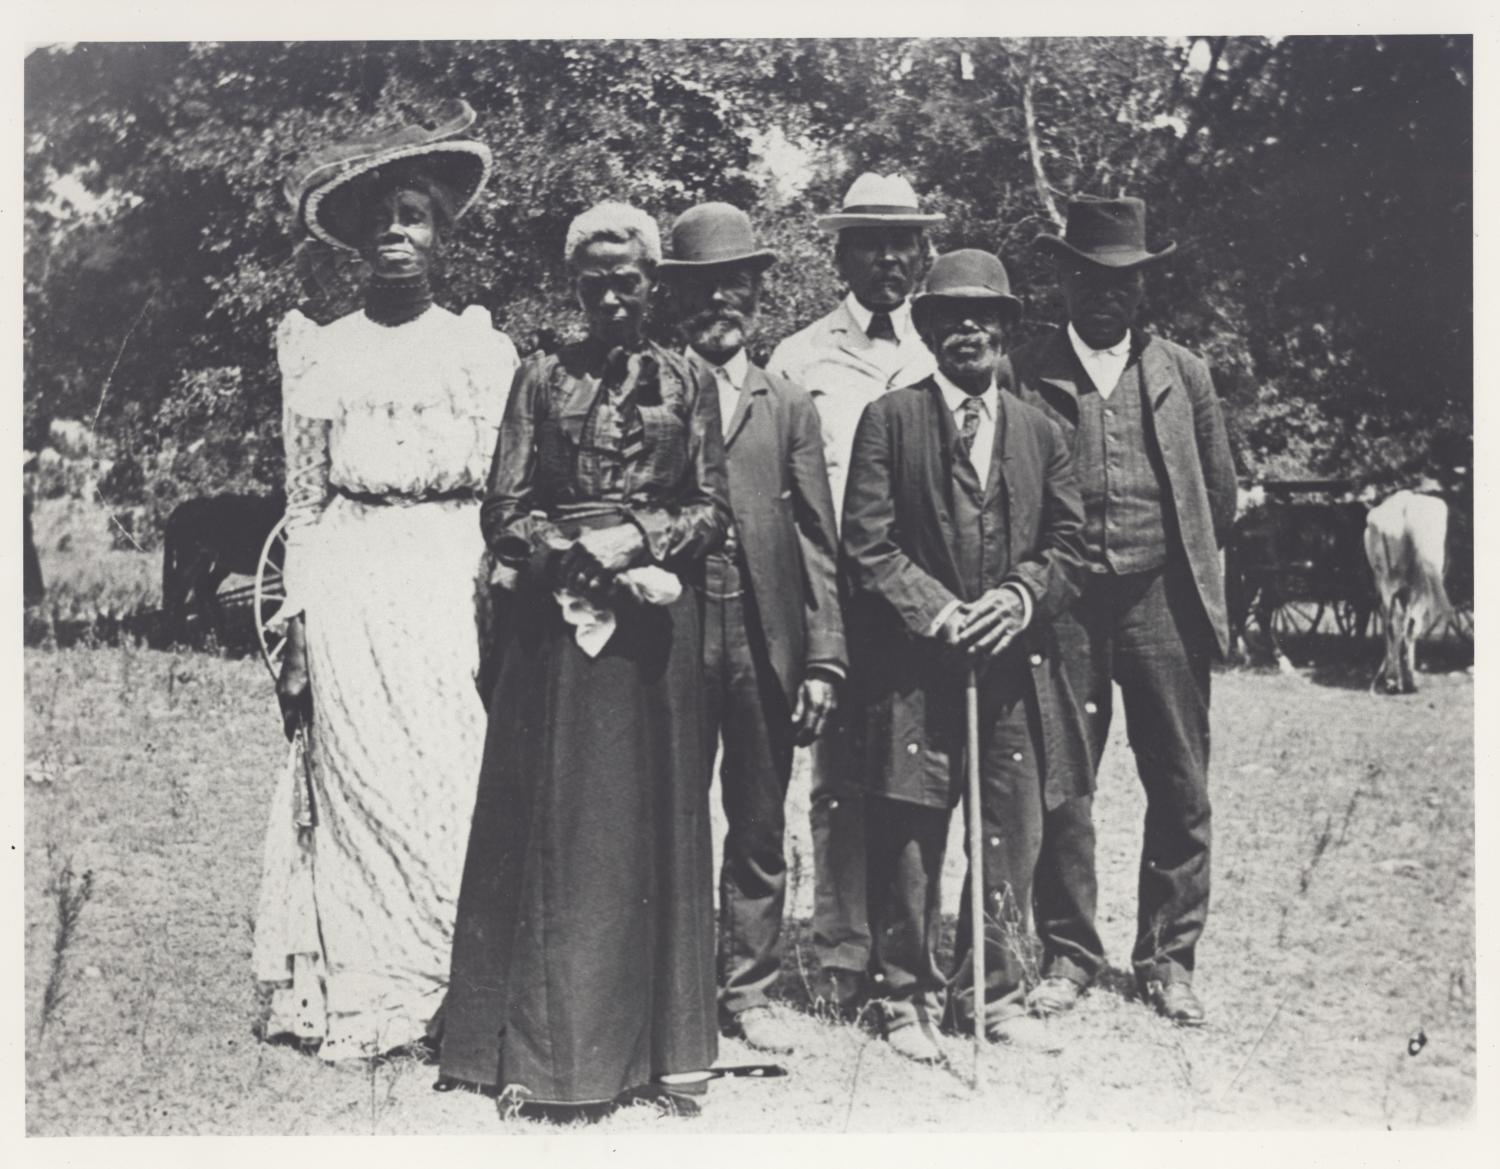 PODCAST Episode 19: Juneteenth! (with transcript)